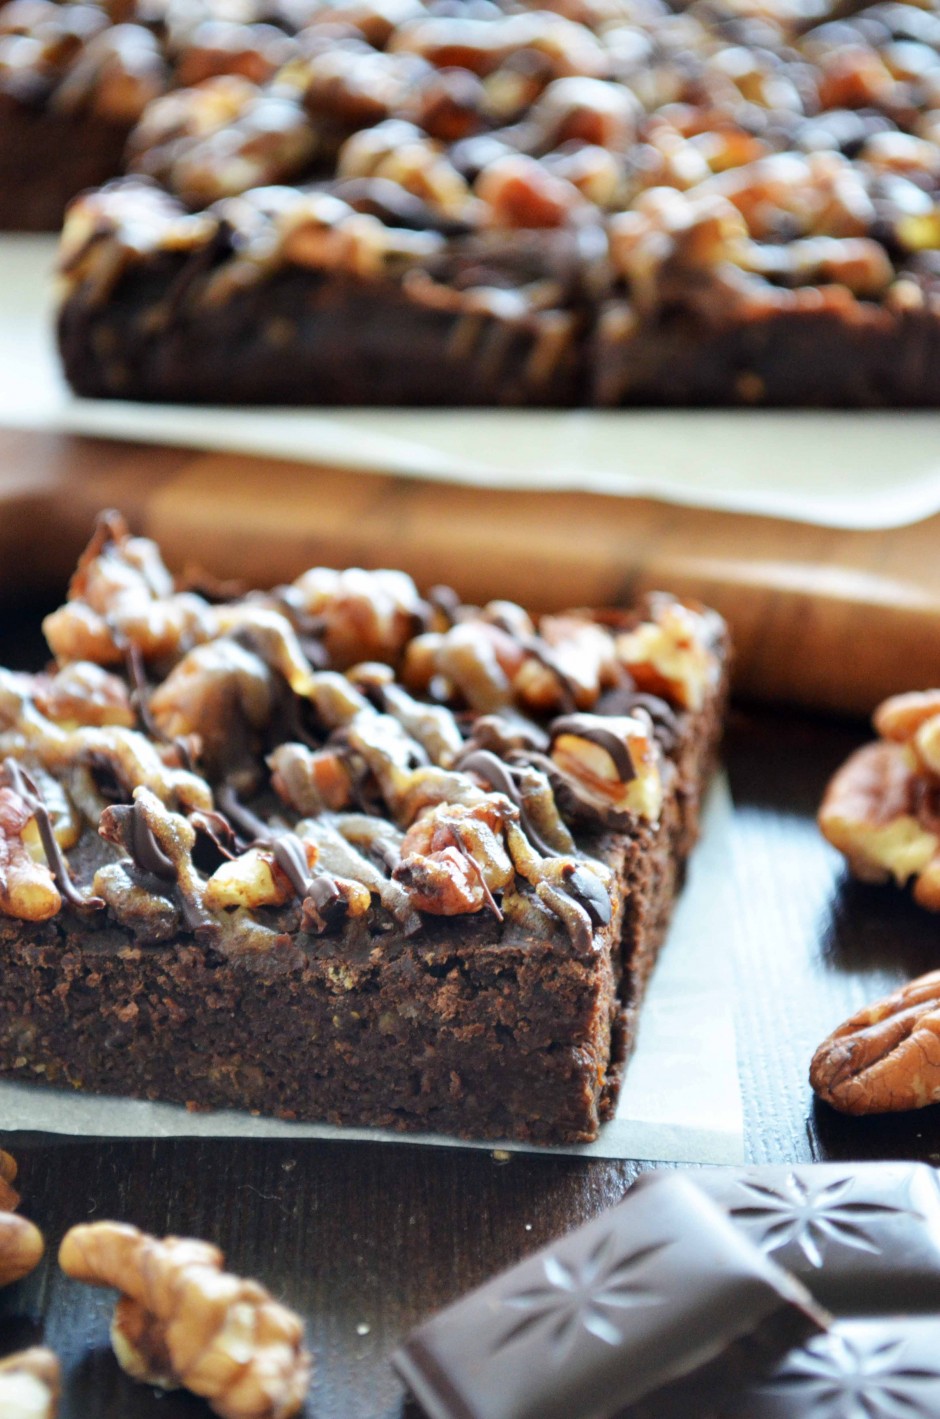 Recipe for pumpkin brownies with nuts and a chocolate and date caramel drizzle. Via That Healthy Kitchen